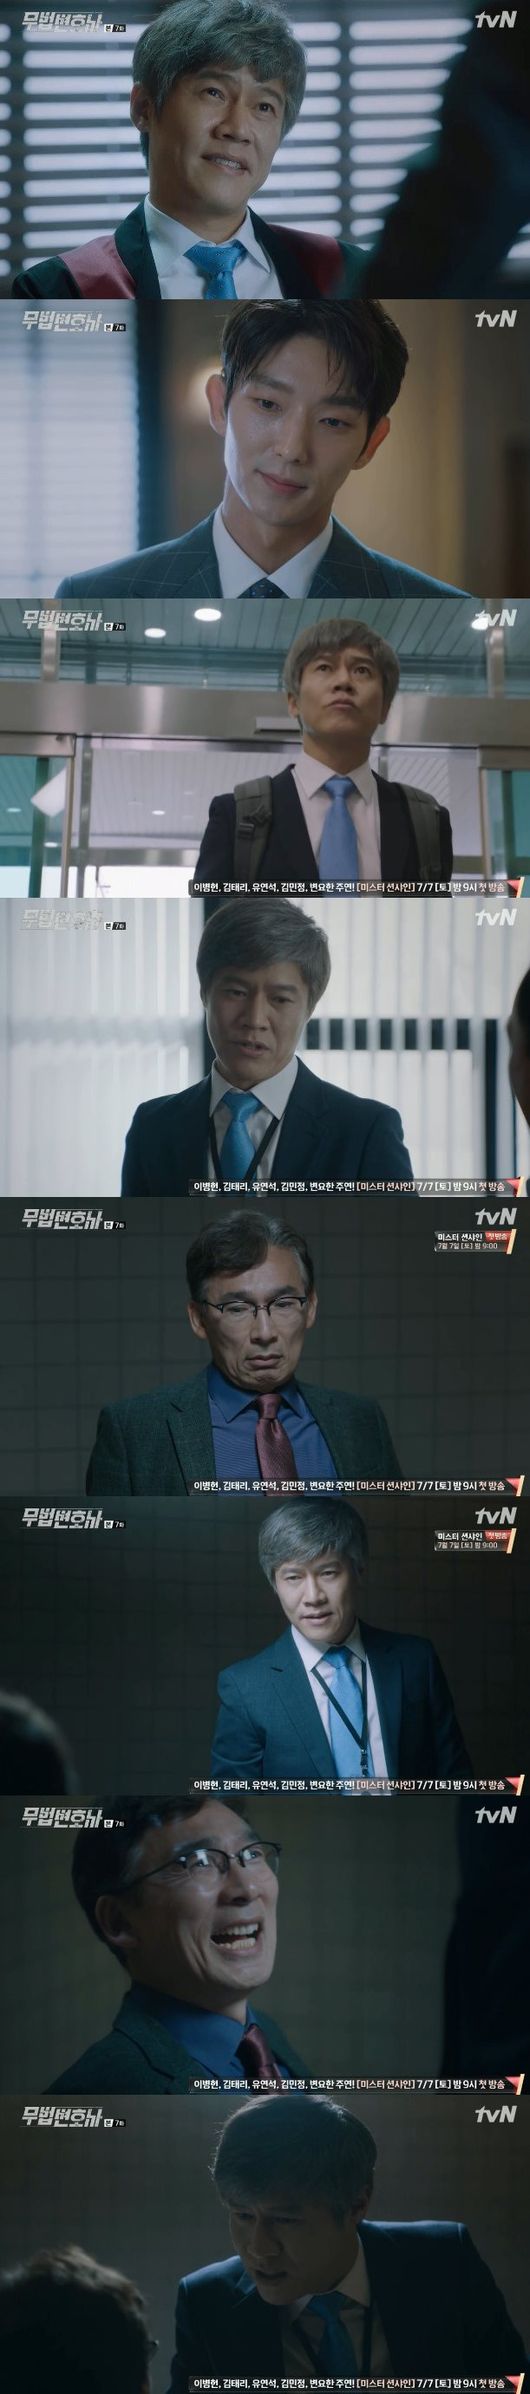 Unlawful counsel Park Ho-san has transformed perfectly into a charismatic prosecutorIn the 7th episode of TVNs Saturday Drama Unlawful Lawyer (playplayed by Yoon Hyun-ho/directed by Kim Jin-min) broadcast on the last 2 days, Bong Sang-pil (Lee Joon-gi) who holds hands with Chun Seung-beom (Park Ho-san) was portrayed to catch An Oh-ju (Choi Min-soo), who became the established mayor.On the other hand, Woo Hyung-man (Lee Dae-yeon), who lost his wife, pledged revenge on An-oh, and handed the material containing the corruption of An-oh to Seo Ye-ji and Seo Ye-ji.In particular, Woo Hyung-man told Ha Jae-yi, I do not owe you anything, and Ha Jae-yis mother was alive.However, Woo Hyung-man, who tried to kill An-ohju, was caught by An-ohju on the contrary, and Bong Sang-pil continued to pursue his actions and went to Chun Seung-bum with the data of An-oh and Oju groups.Chun Seung-bum is a prosecutor who put Bong Sang-pil in prison in the past.As the two people are intertwined with each other, Chun Seung-bum poured out the vitriol as soon as he saw Bong Sang-pil, and Bong Sang-pil said, Do not believe me, believe the documents.Come down to the lawless city. So, Chun Seung-bum came down to the old castle and investigated the case.In particular, Chun Seung-bum questioned the bank president involved in the corruption, raising tension, and he canceled the plan of the Oju Group blank trust of Cha Moon-sook and An-oh.Cha Moon-sook ordered An-oh to donate the Oju Group to his fathers foundation, which caused an invisible crack between the two.At the end of the broadcast, Bong Sang-pil found the place where Woo Hyung-man was located and rescued him late, but Woo Hyung-man, who was seriously injured, died, and An-ju appeared in Woo Hyung-mans The Funeral, angering Bong Sang-pil.Above all, Ha Jae-yis mother and Ha Jae-yi, who secretly visited The Funeral at this time, met and wondered about the next episode.Park Ho-san, who first appeared as a helper for Lee Joon-gi and Seo Ye-ji on the day, transformed into a charismatic test and attracted attention.I was impressed by the familiar appearance that I showed in TVN Drama Spicy Life and My Man from Nowhere.Above all, Park Ho-san is put into lawless lawyer immediately after the end of My Man from Nowhere.He has been well received for his short interpretation of the character and added immersion to the drama.So, Park Ho-san is looking forward to seeing Lee Joon-gi and Seo Ye-ji in the future.Unlawful Counsel Broadcast Screen Capture